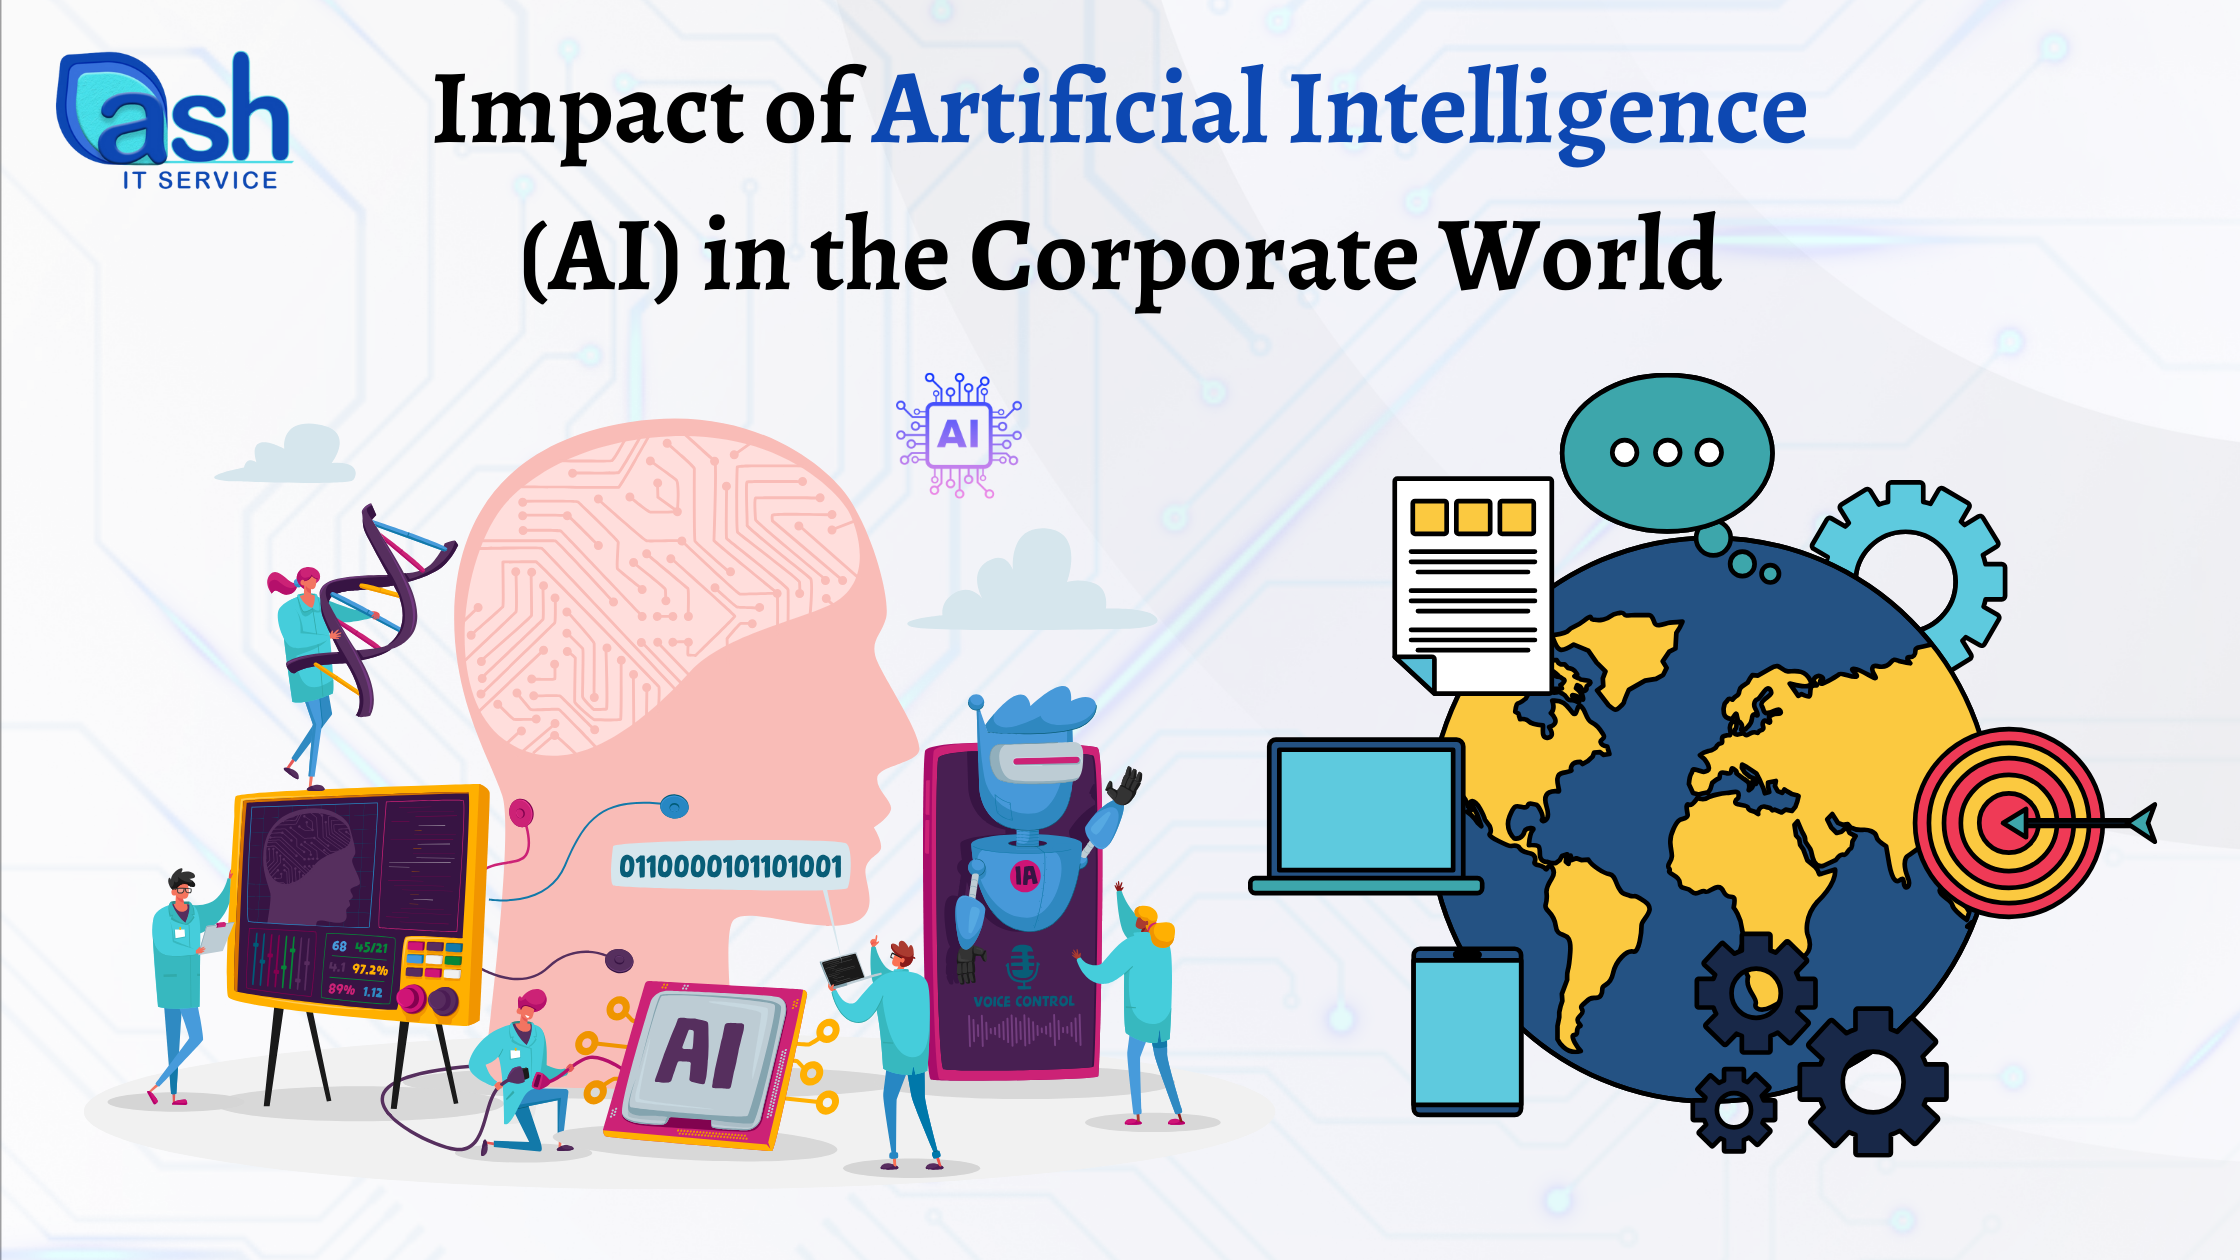 Impact of Artificial Intelligence (AI) in the Corporate World